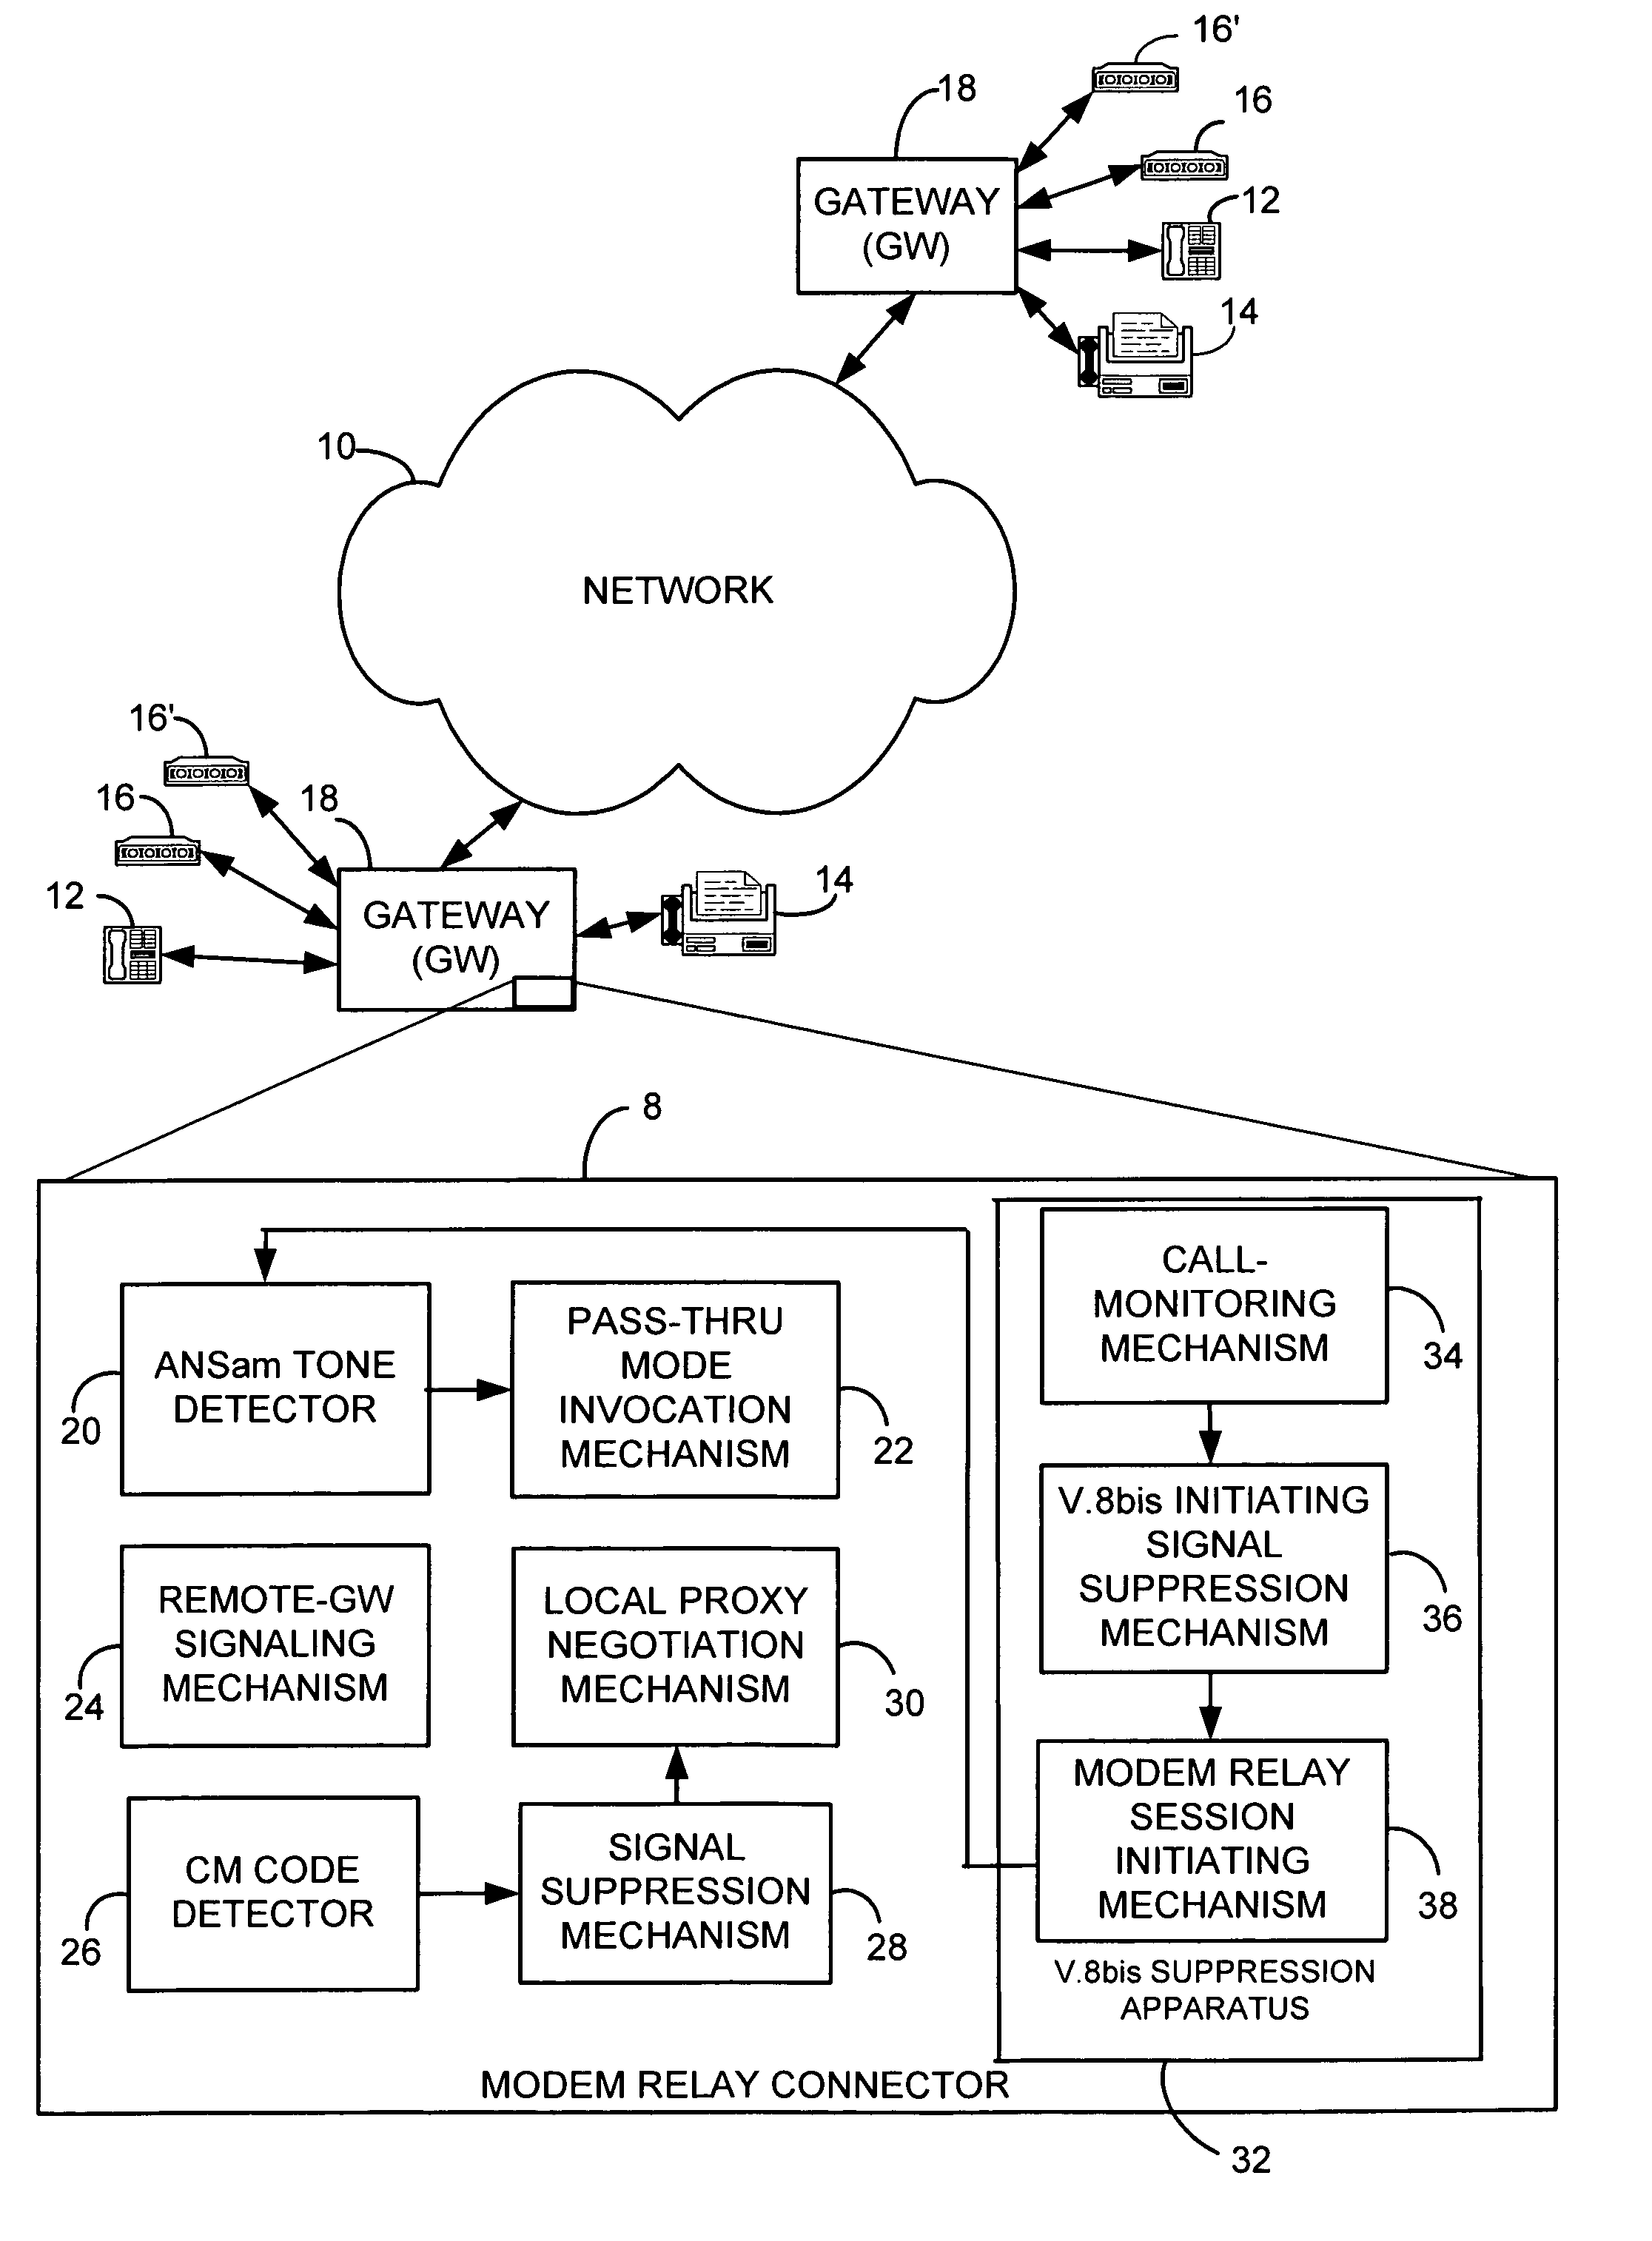 V.8bis suppression method and apparatus for modem relay